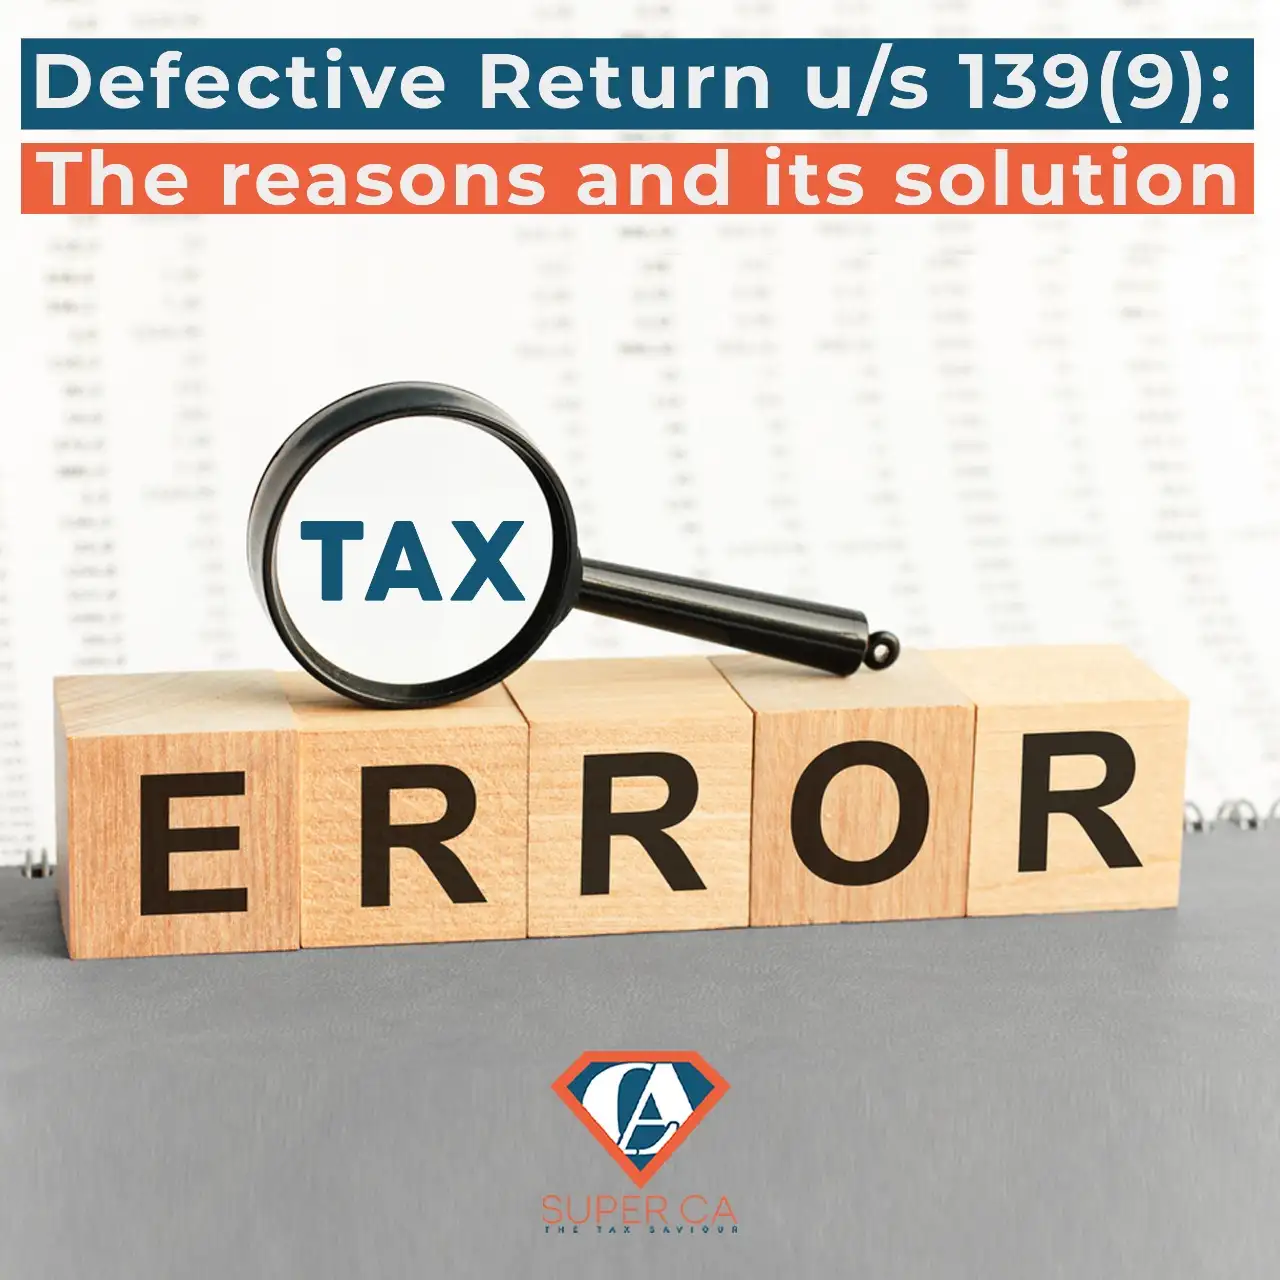 Defective Return u/s 139(9) : The reasons and its solution